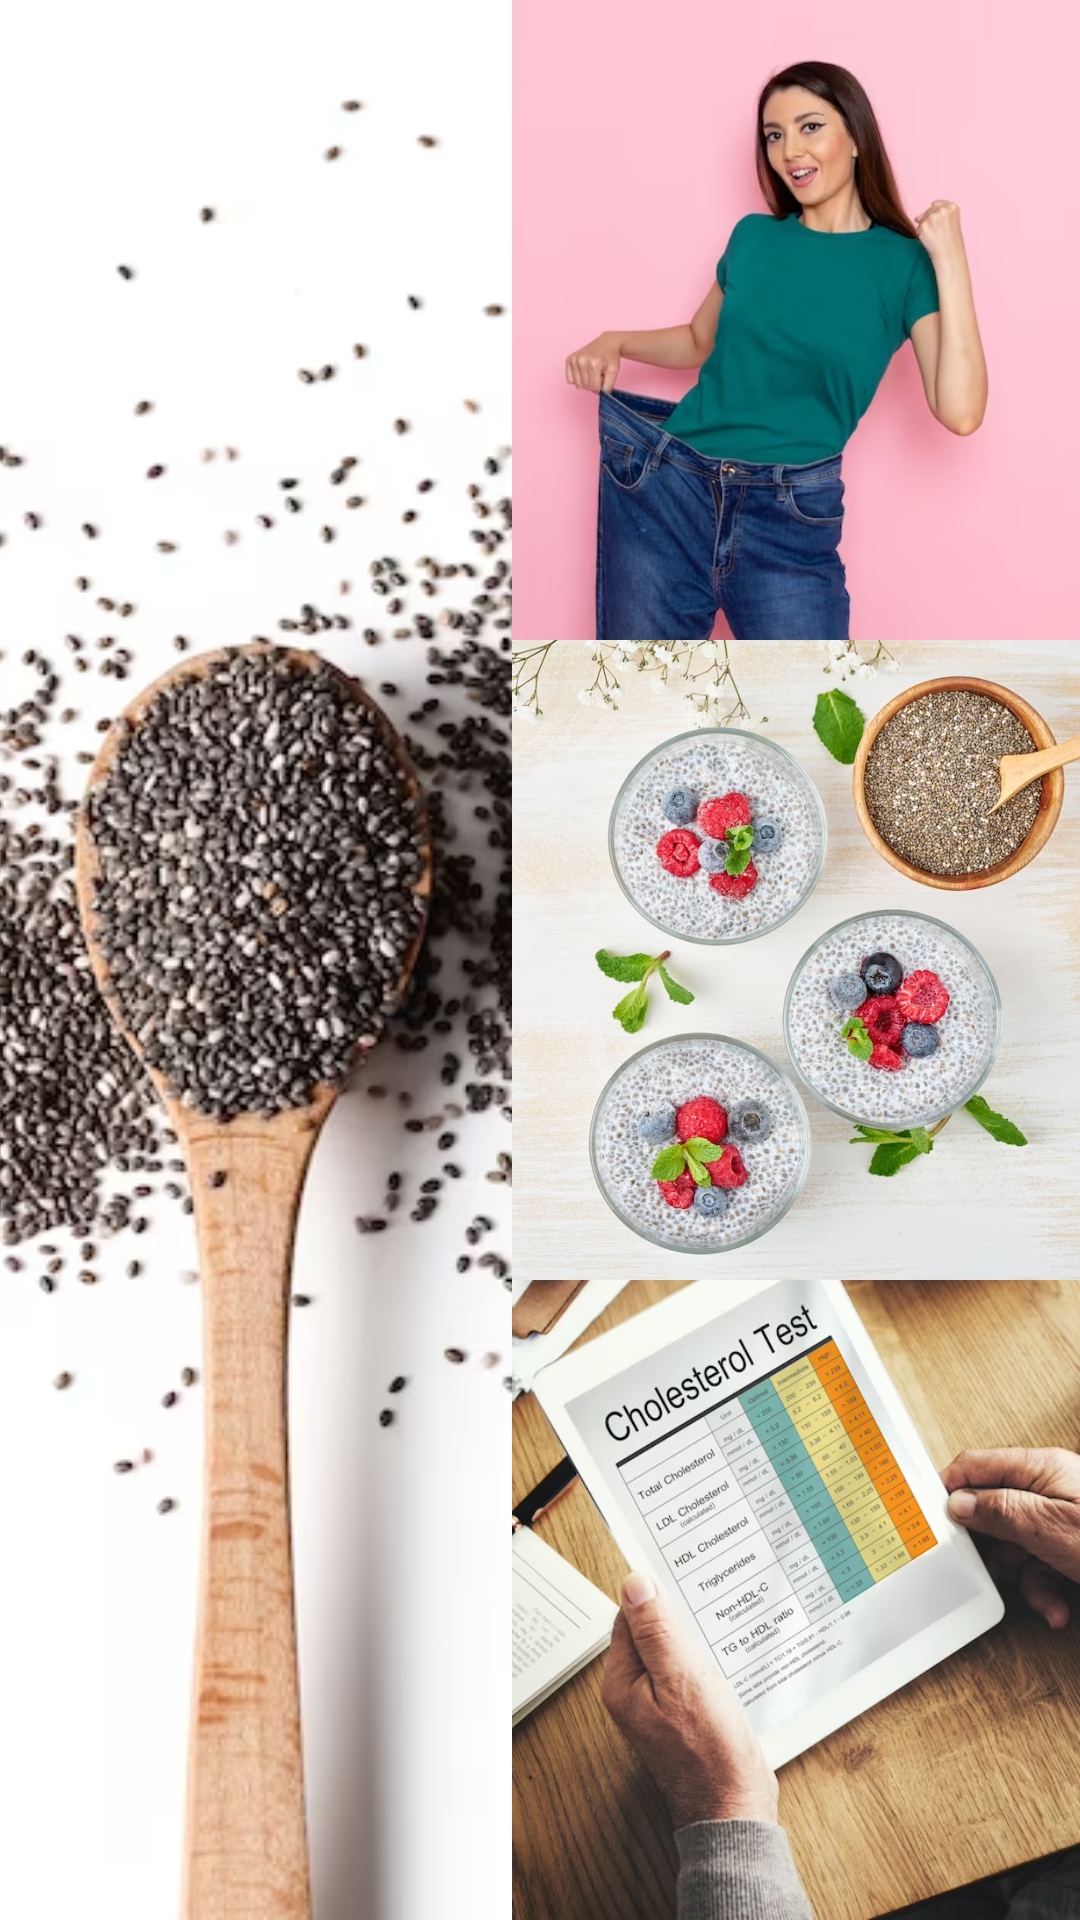 Want to purchase chia seeds? Following are some amazing health advantages of chia seeds